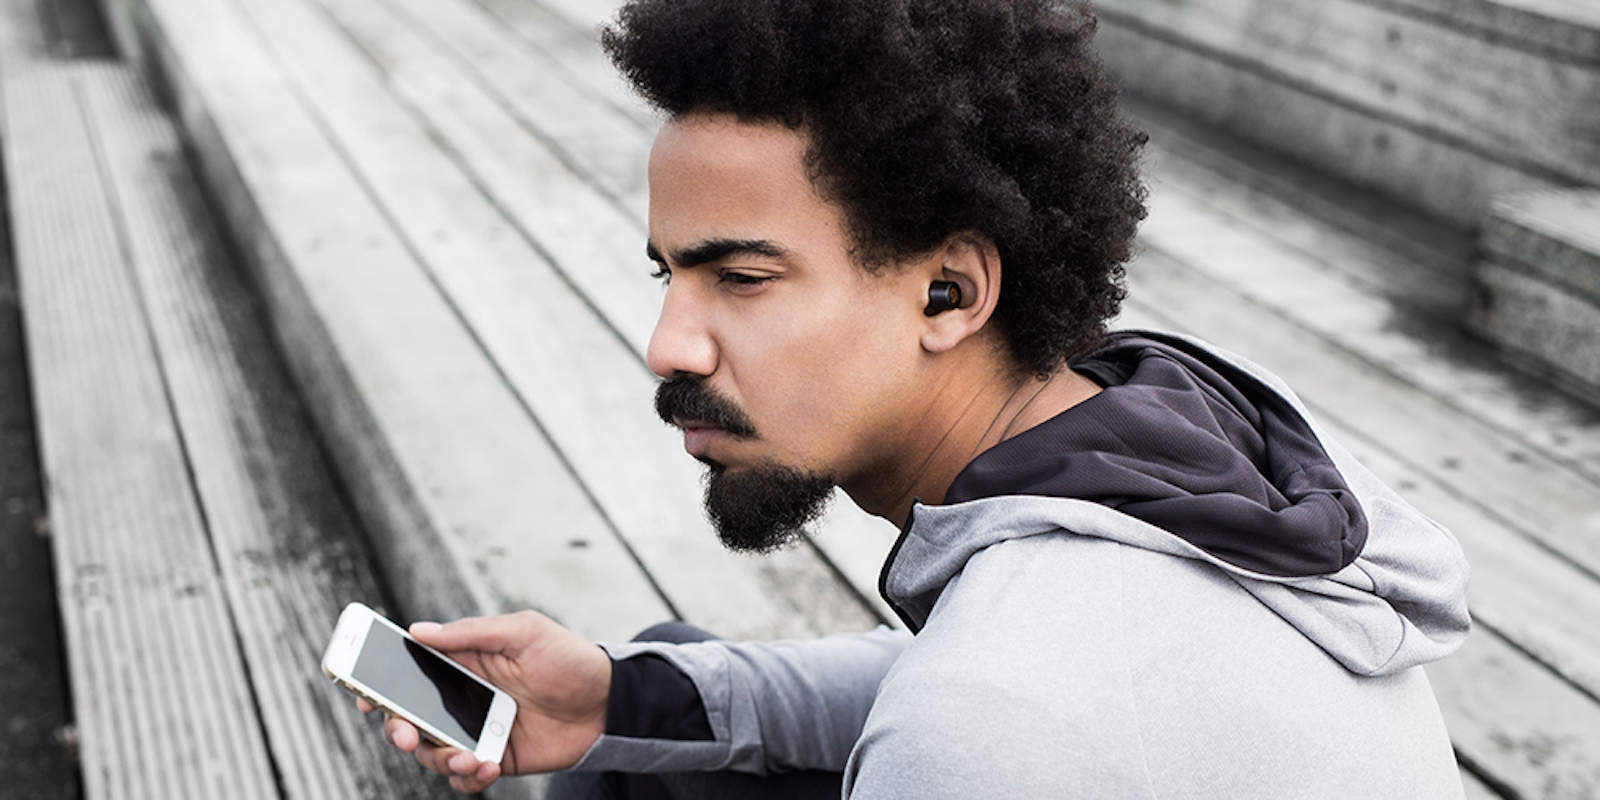 These Bluetooth buds are a good sight cooler than Apple's new wireless earpieces.